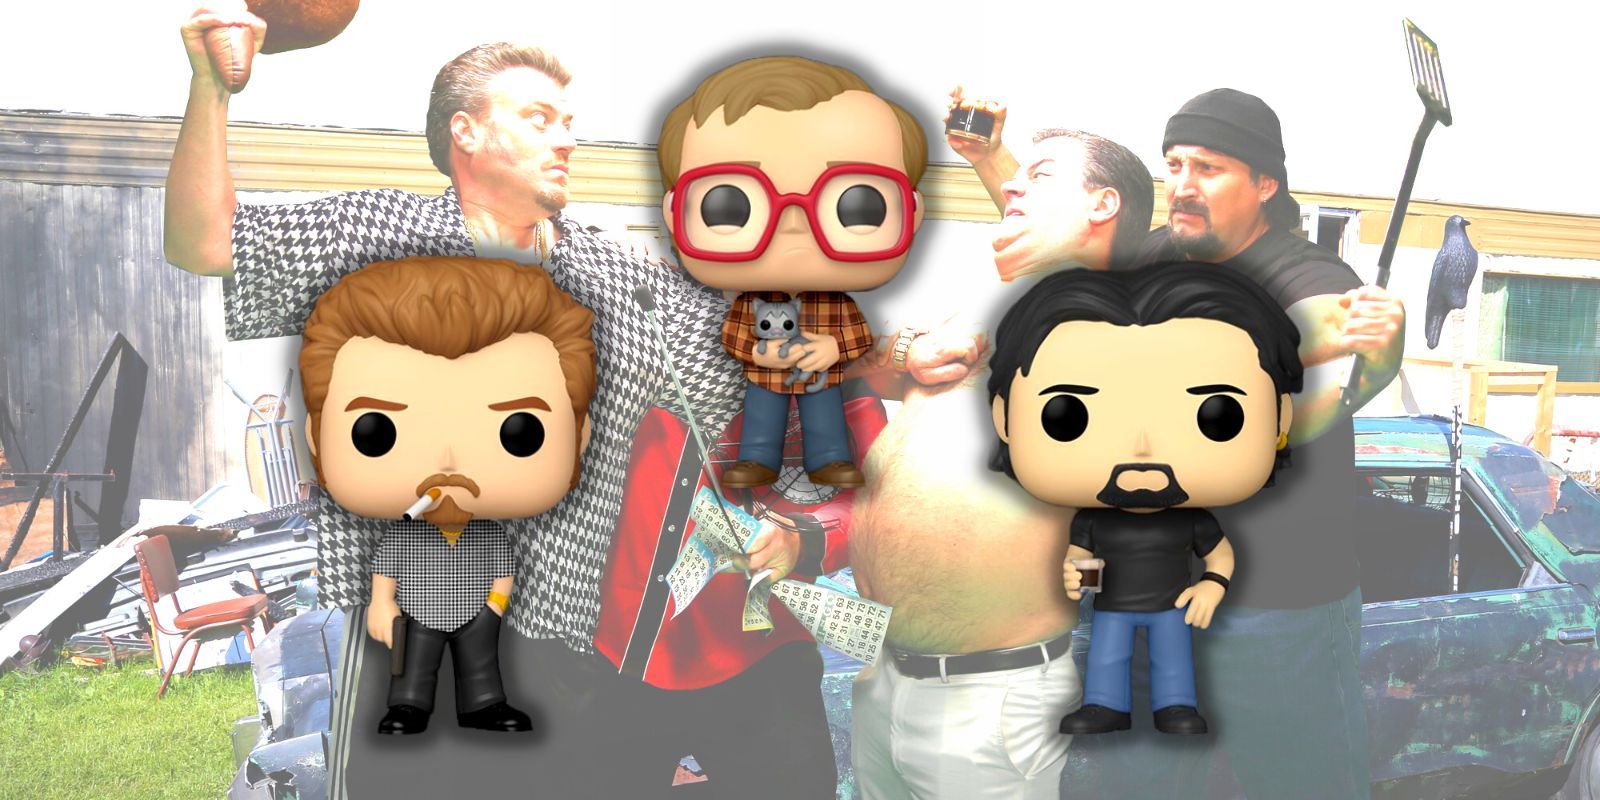 The Trailer Park Boys Funko Pops over an image of Julian swinging a toy beaver